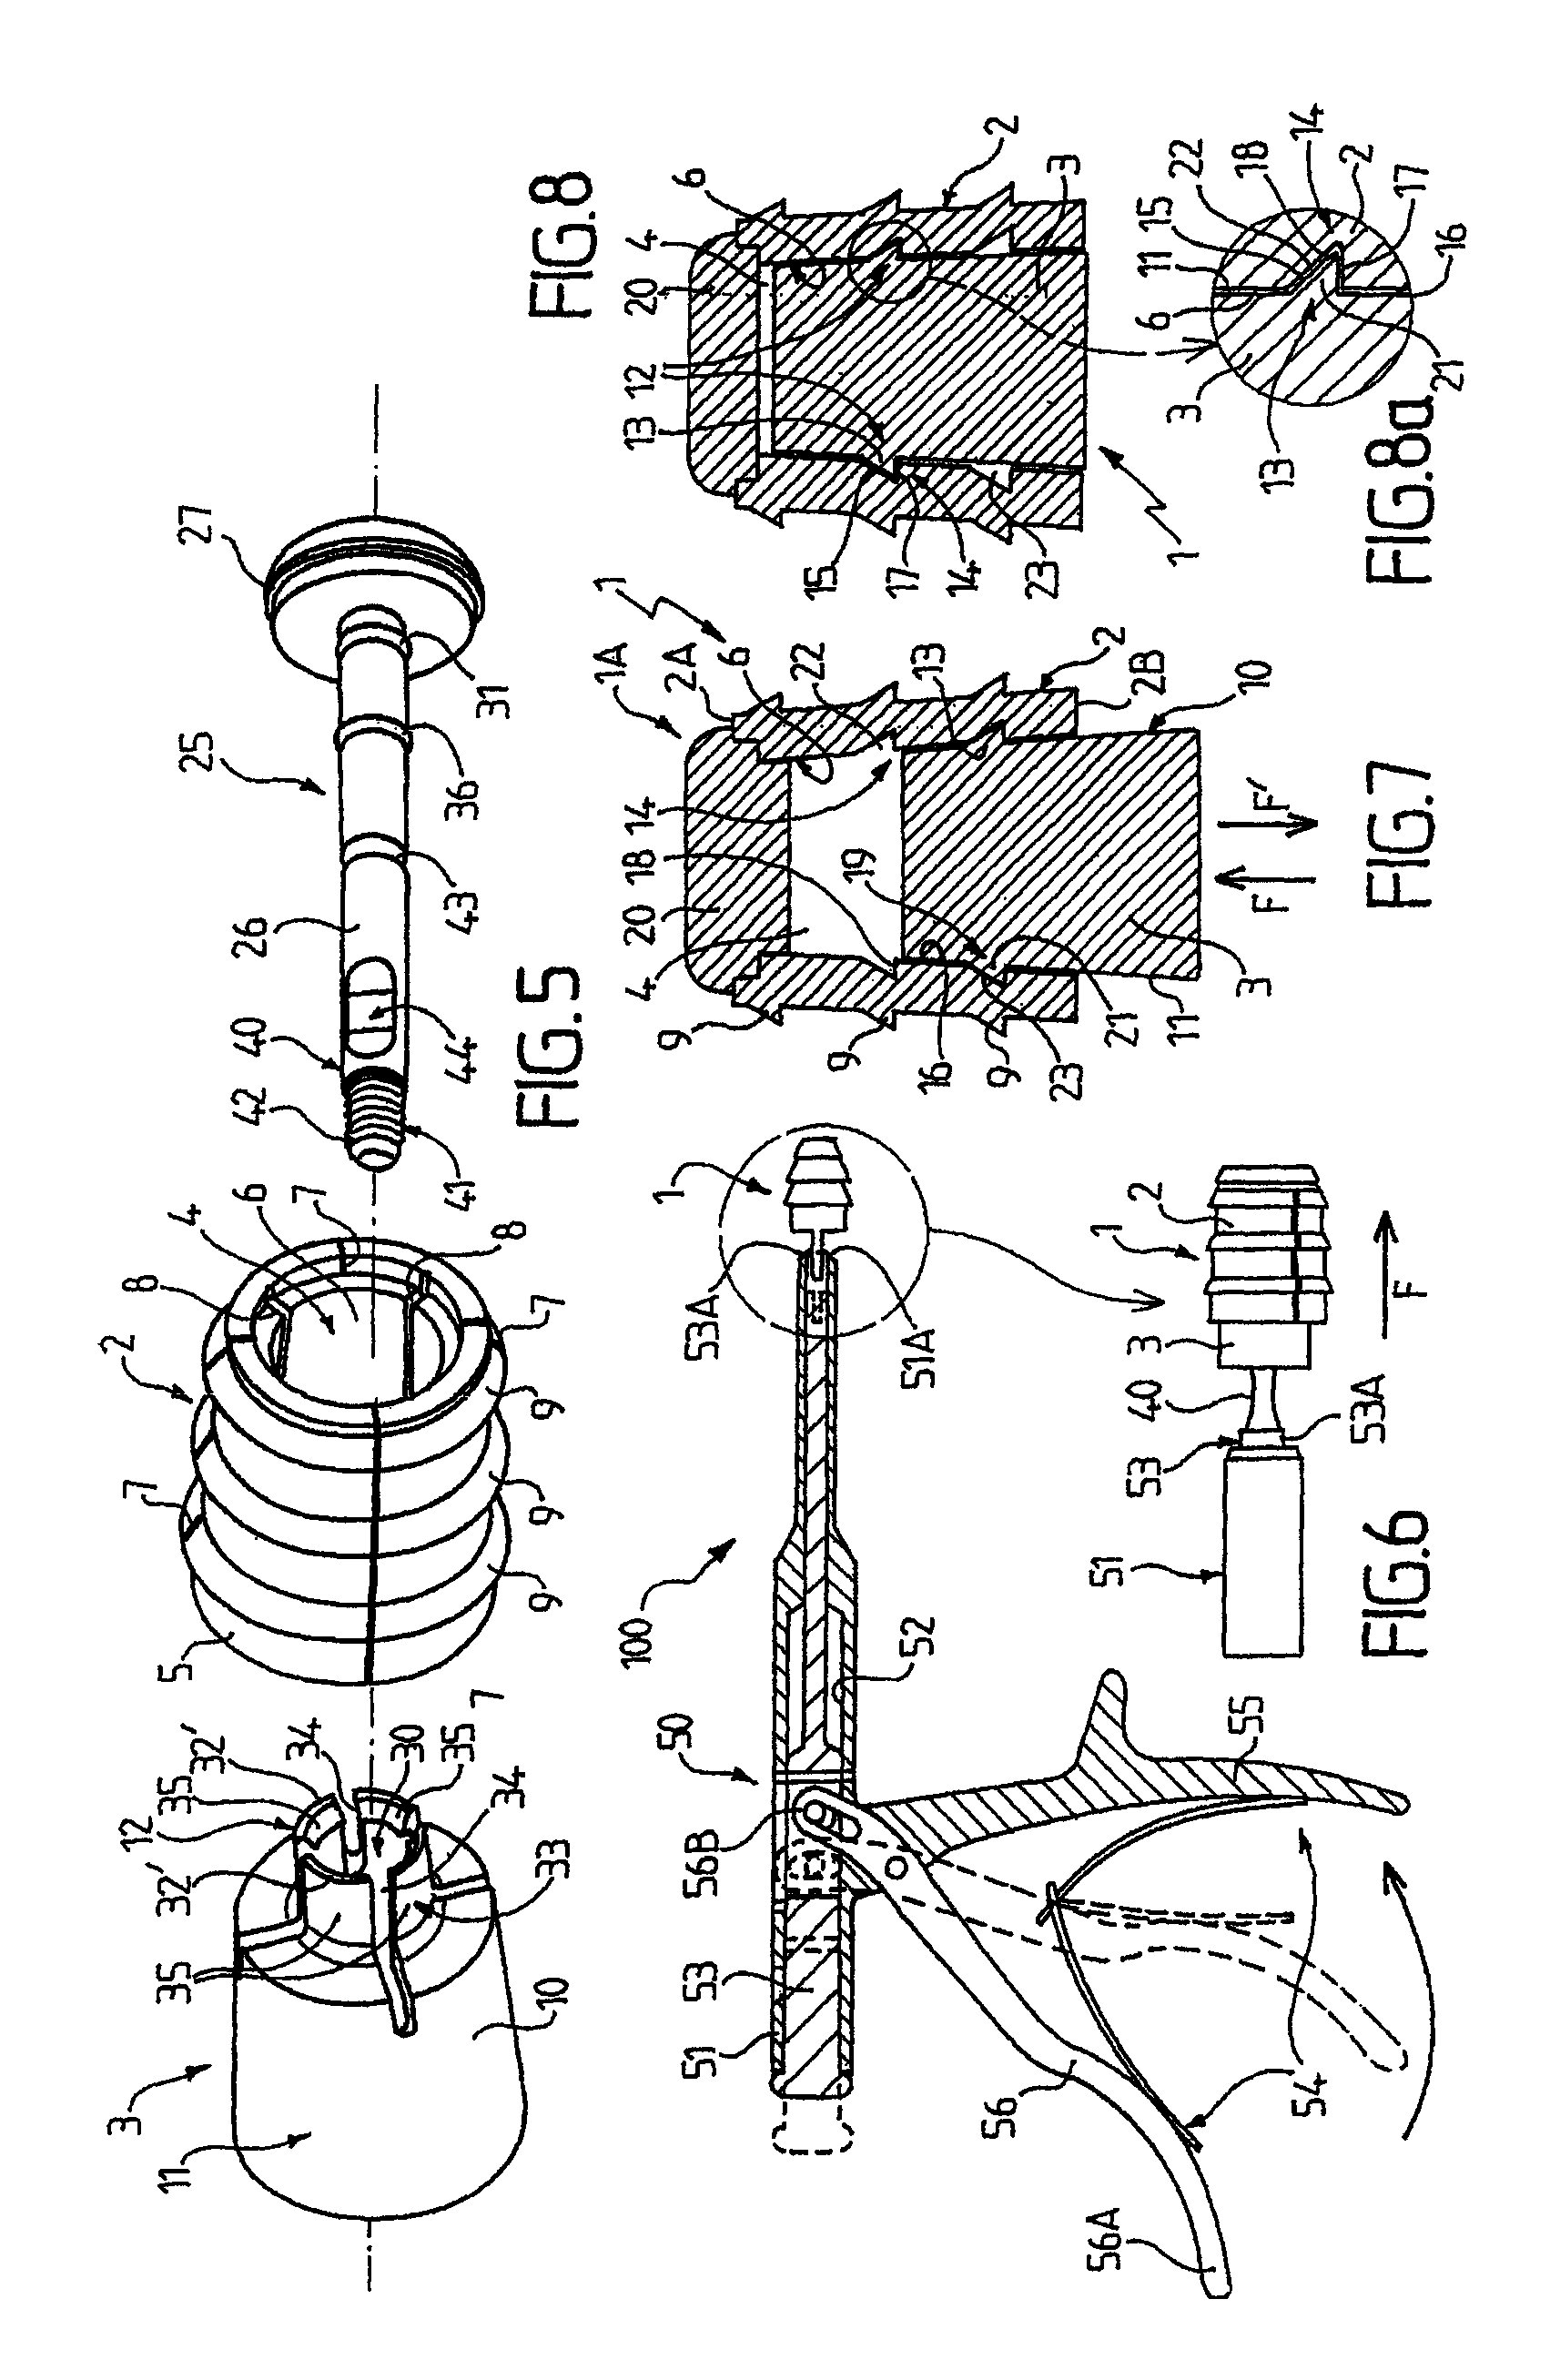 Surgical device for treating flat feet, and a corresponding surgical kit